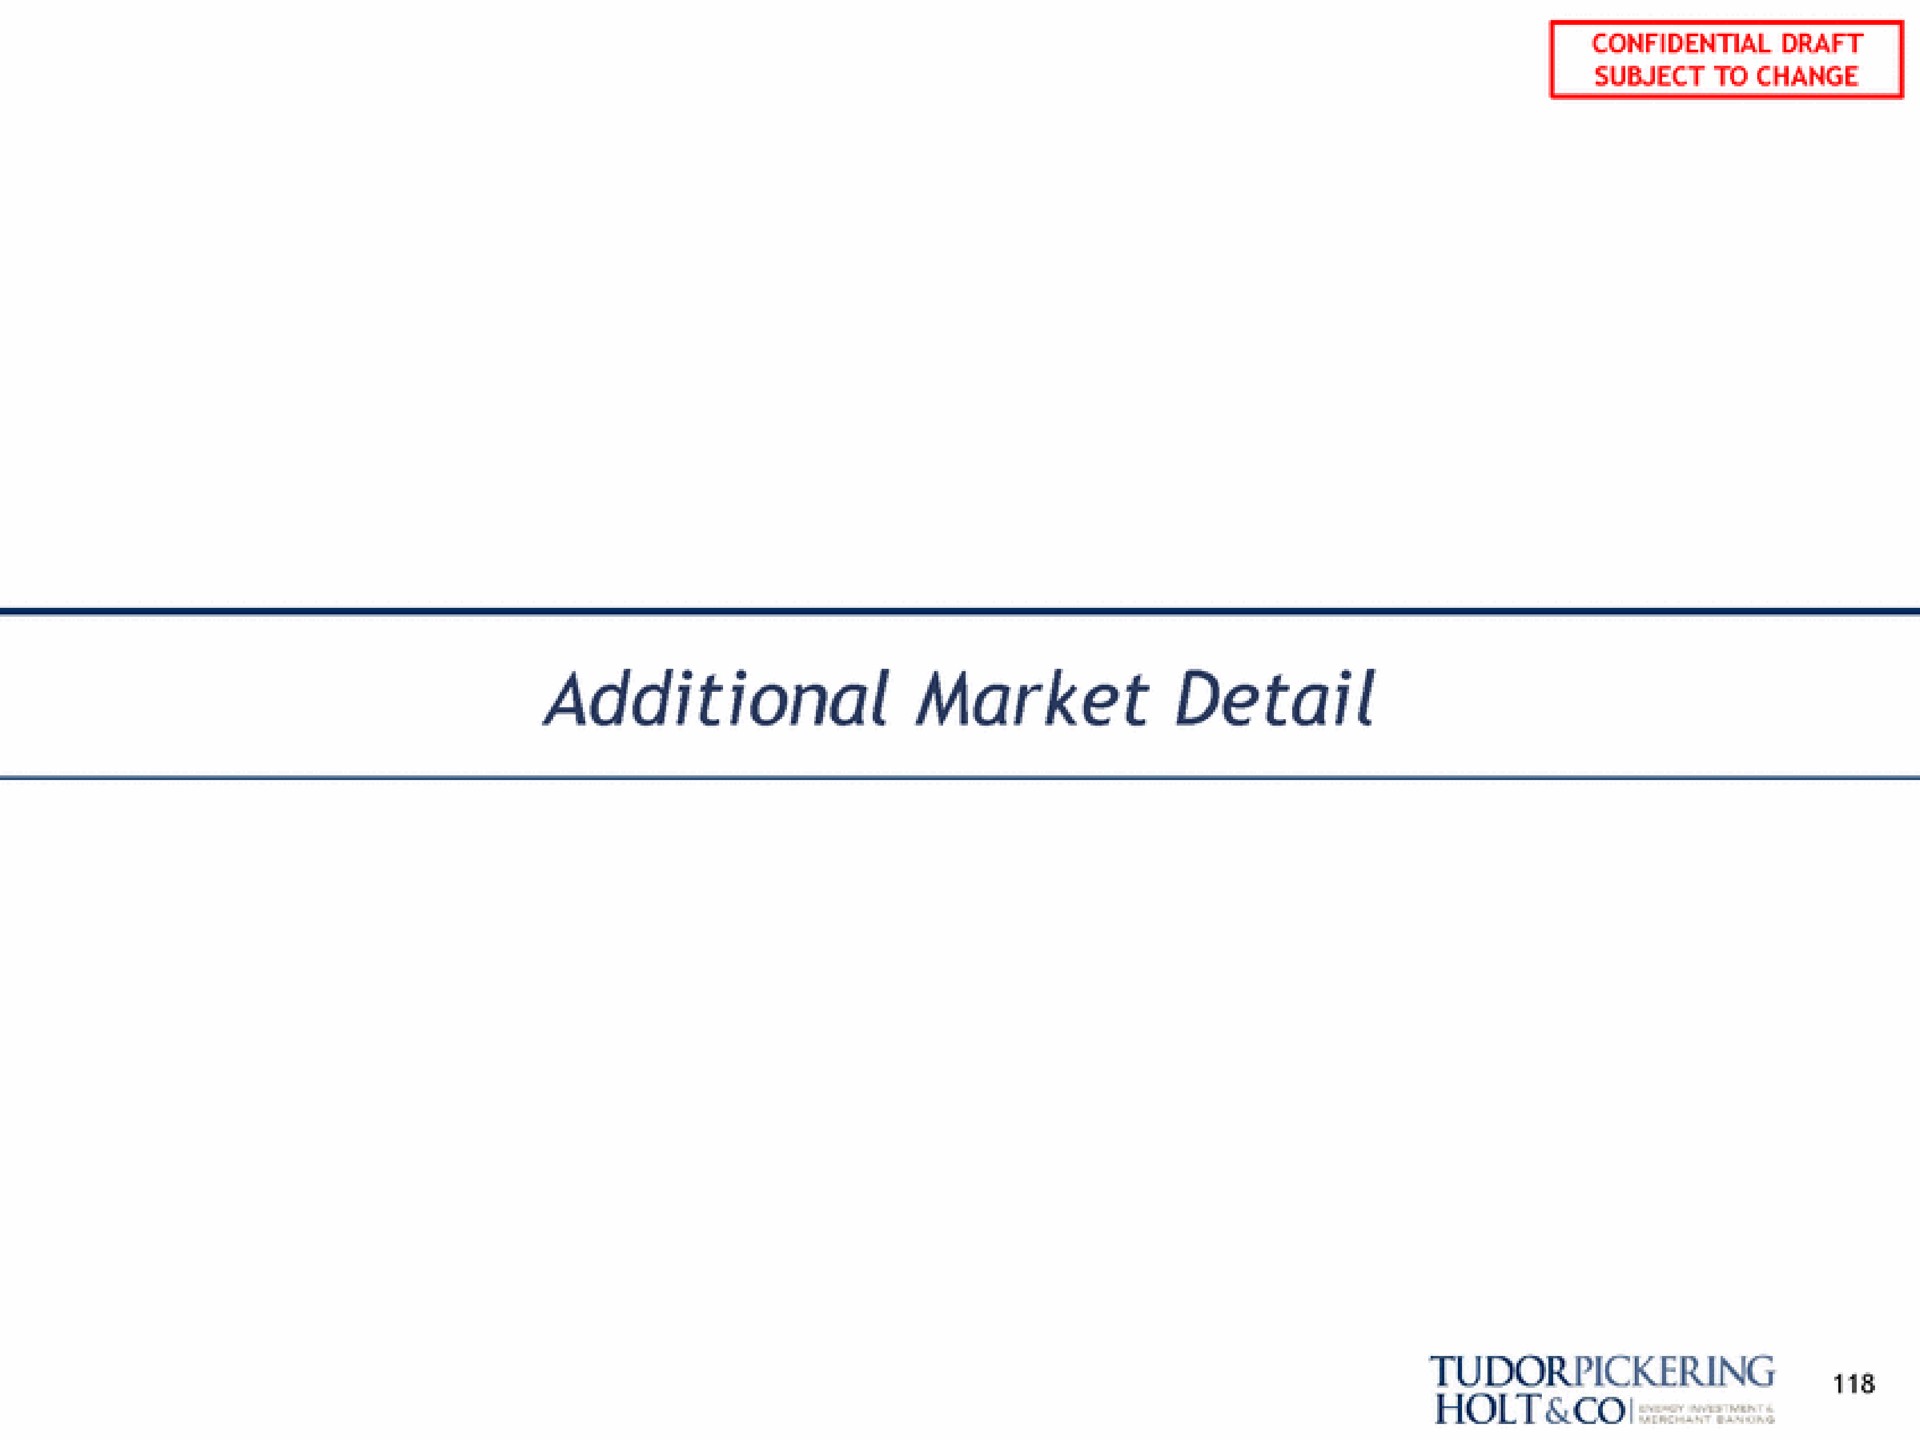 additional market detail subject to change | Tudor, Pickering, Holt & Co